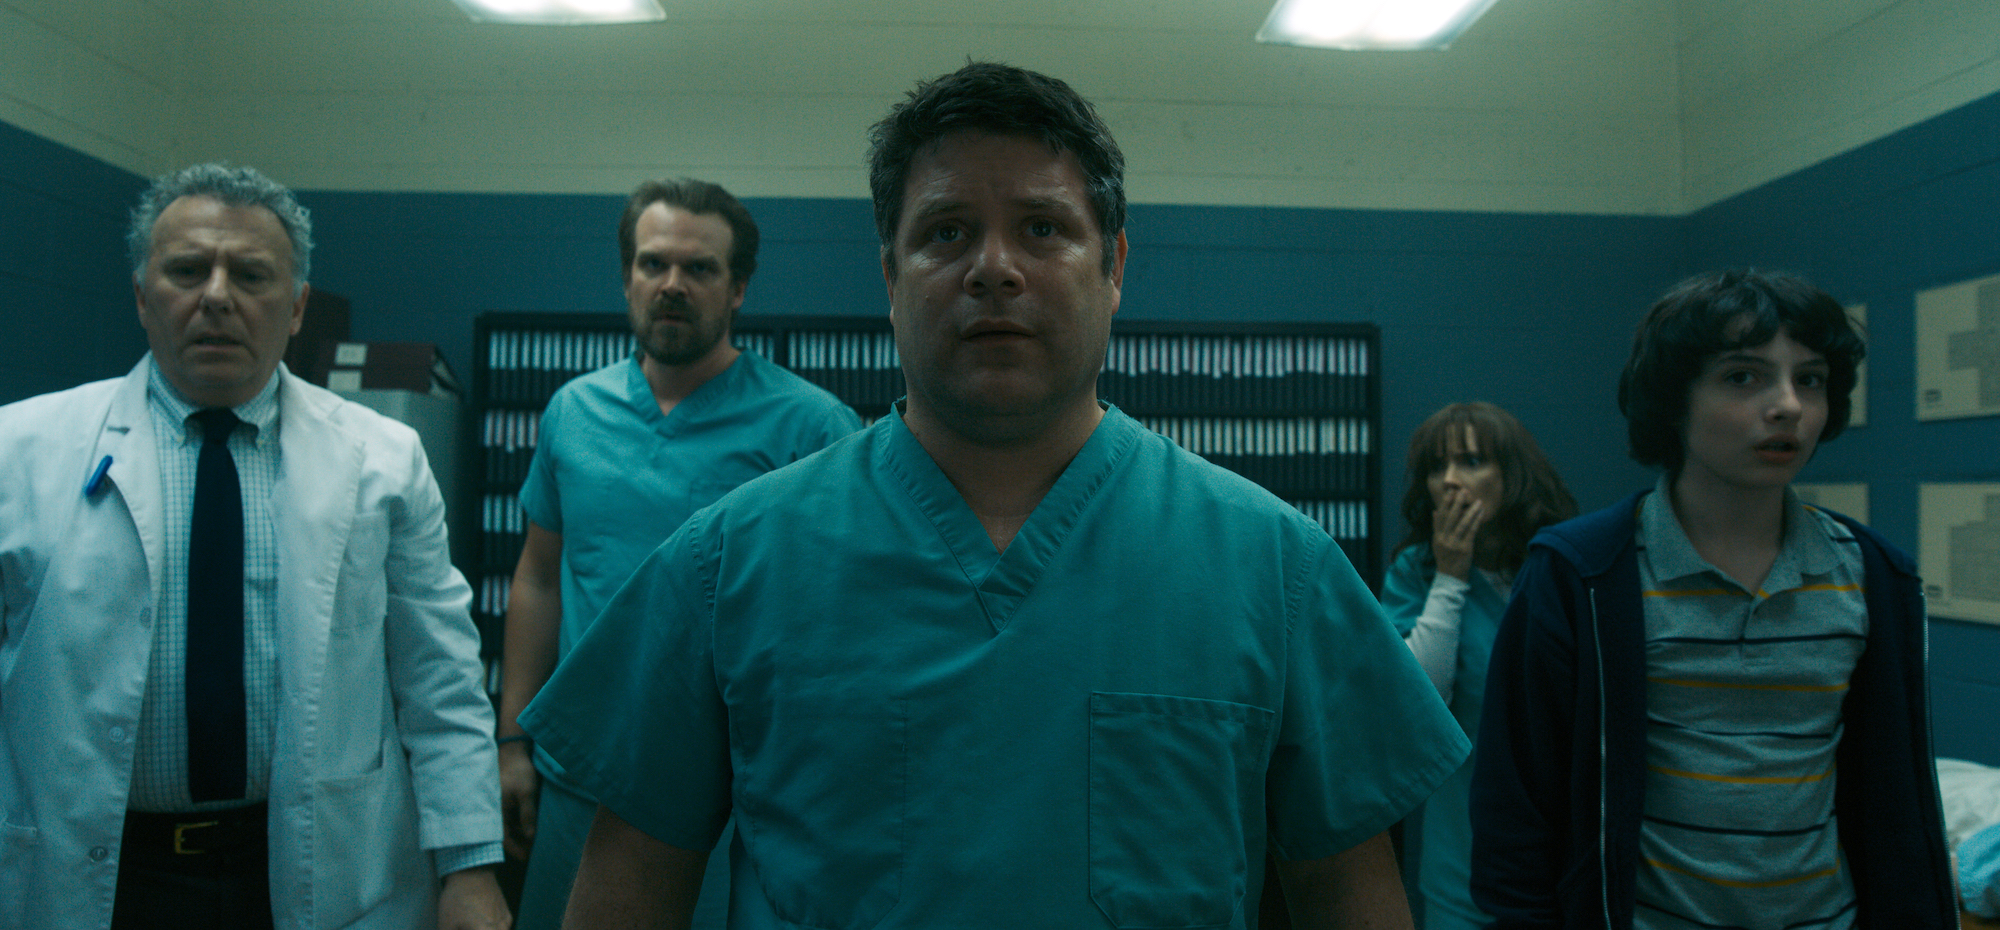 Sean Astin as Bob Newby stands with Joyce Byers, Jim Hopper, and Dr. Owens in the Hawkins lab in a production still from 'Stranger Things' Season 2.